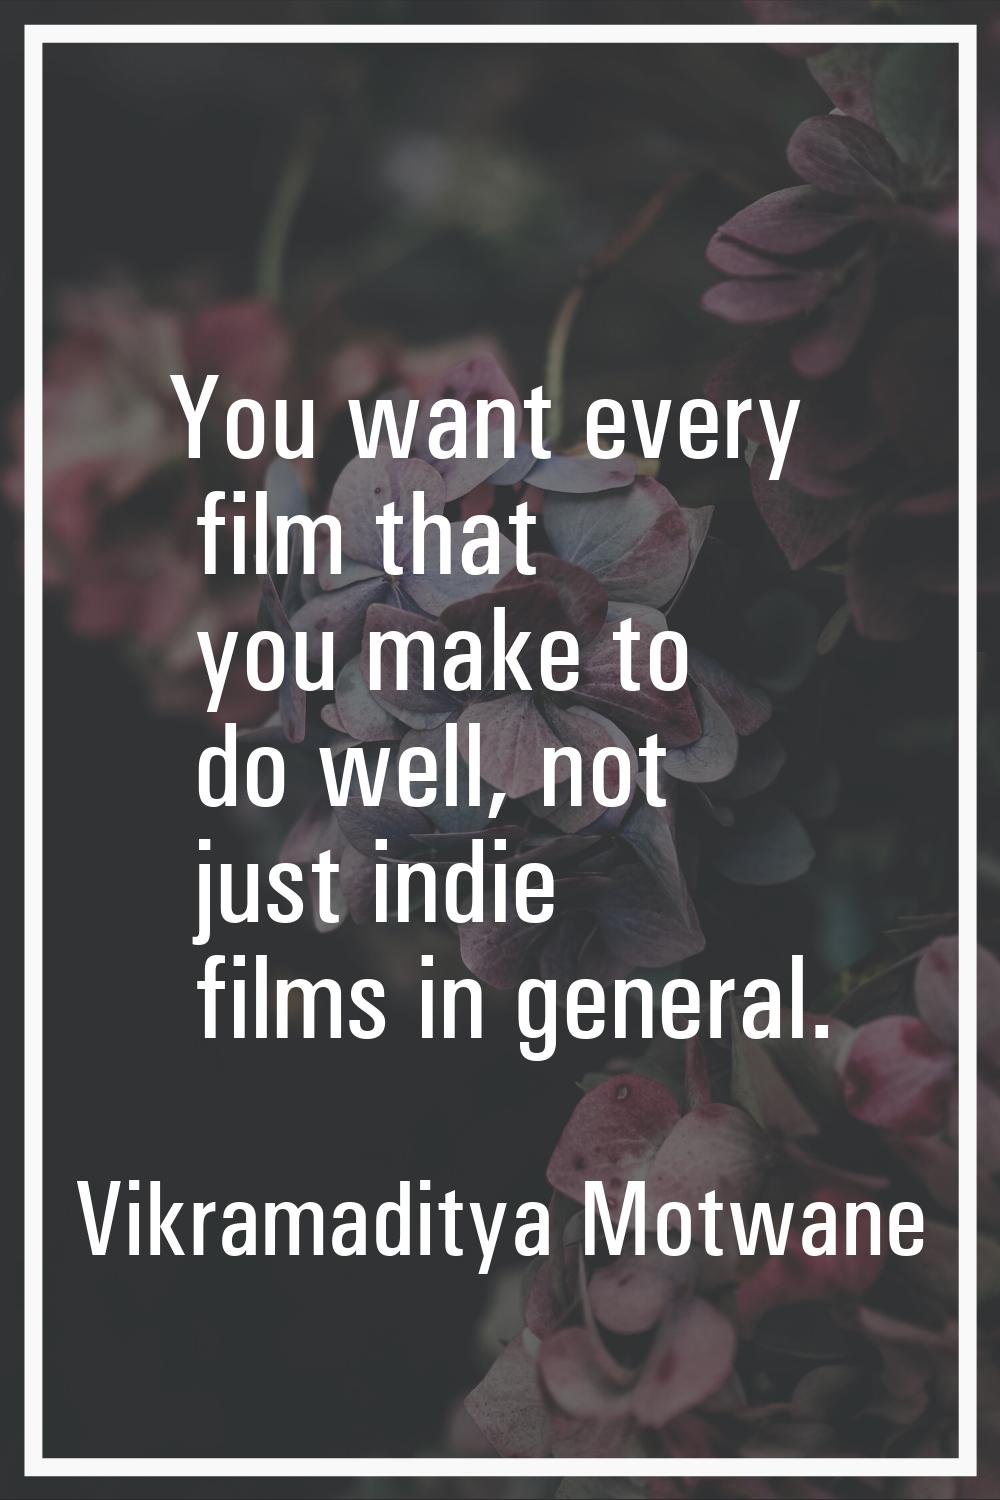 You want every film that you make to do well, not just indie films in general.